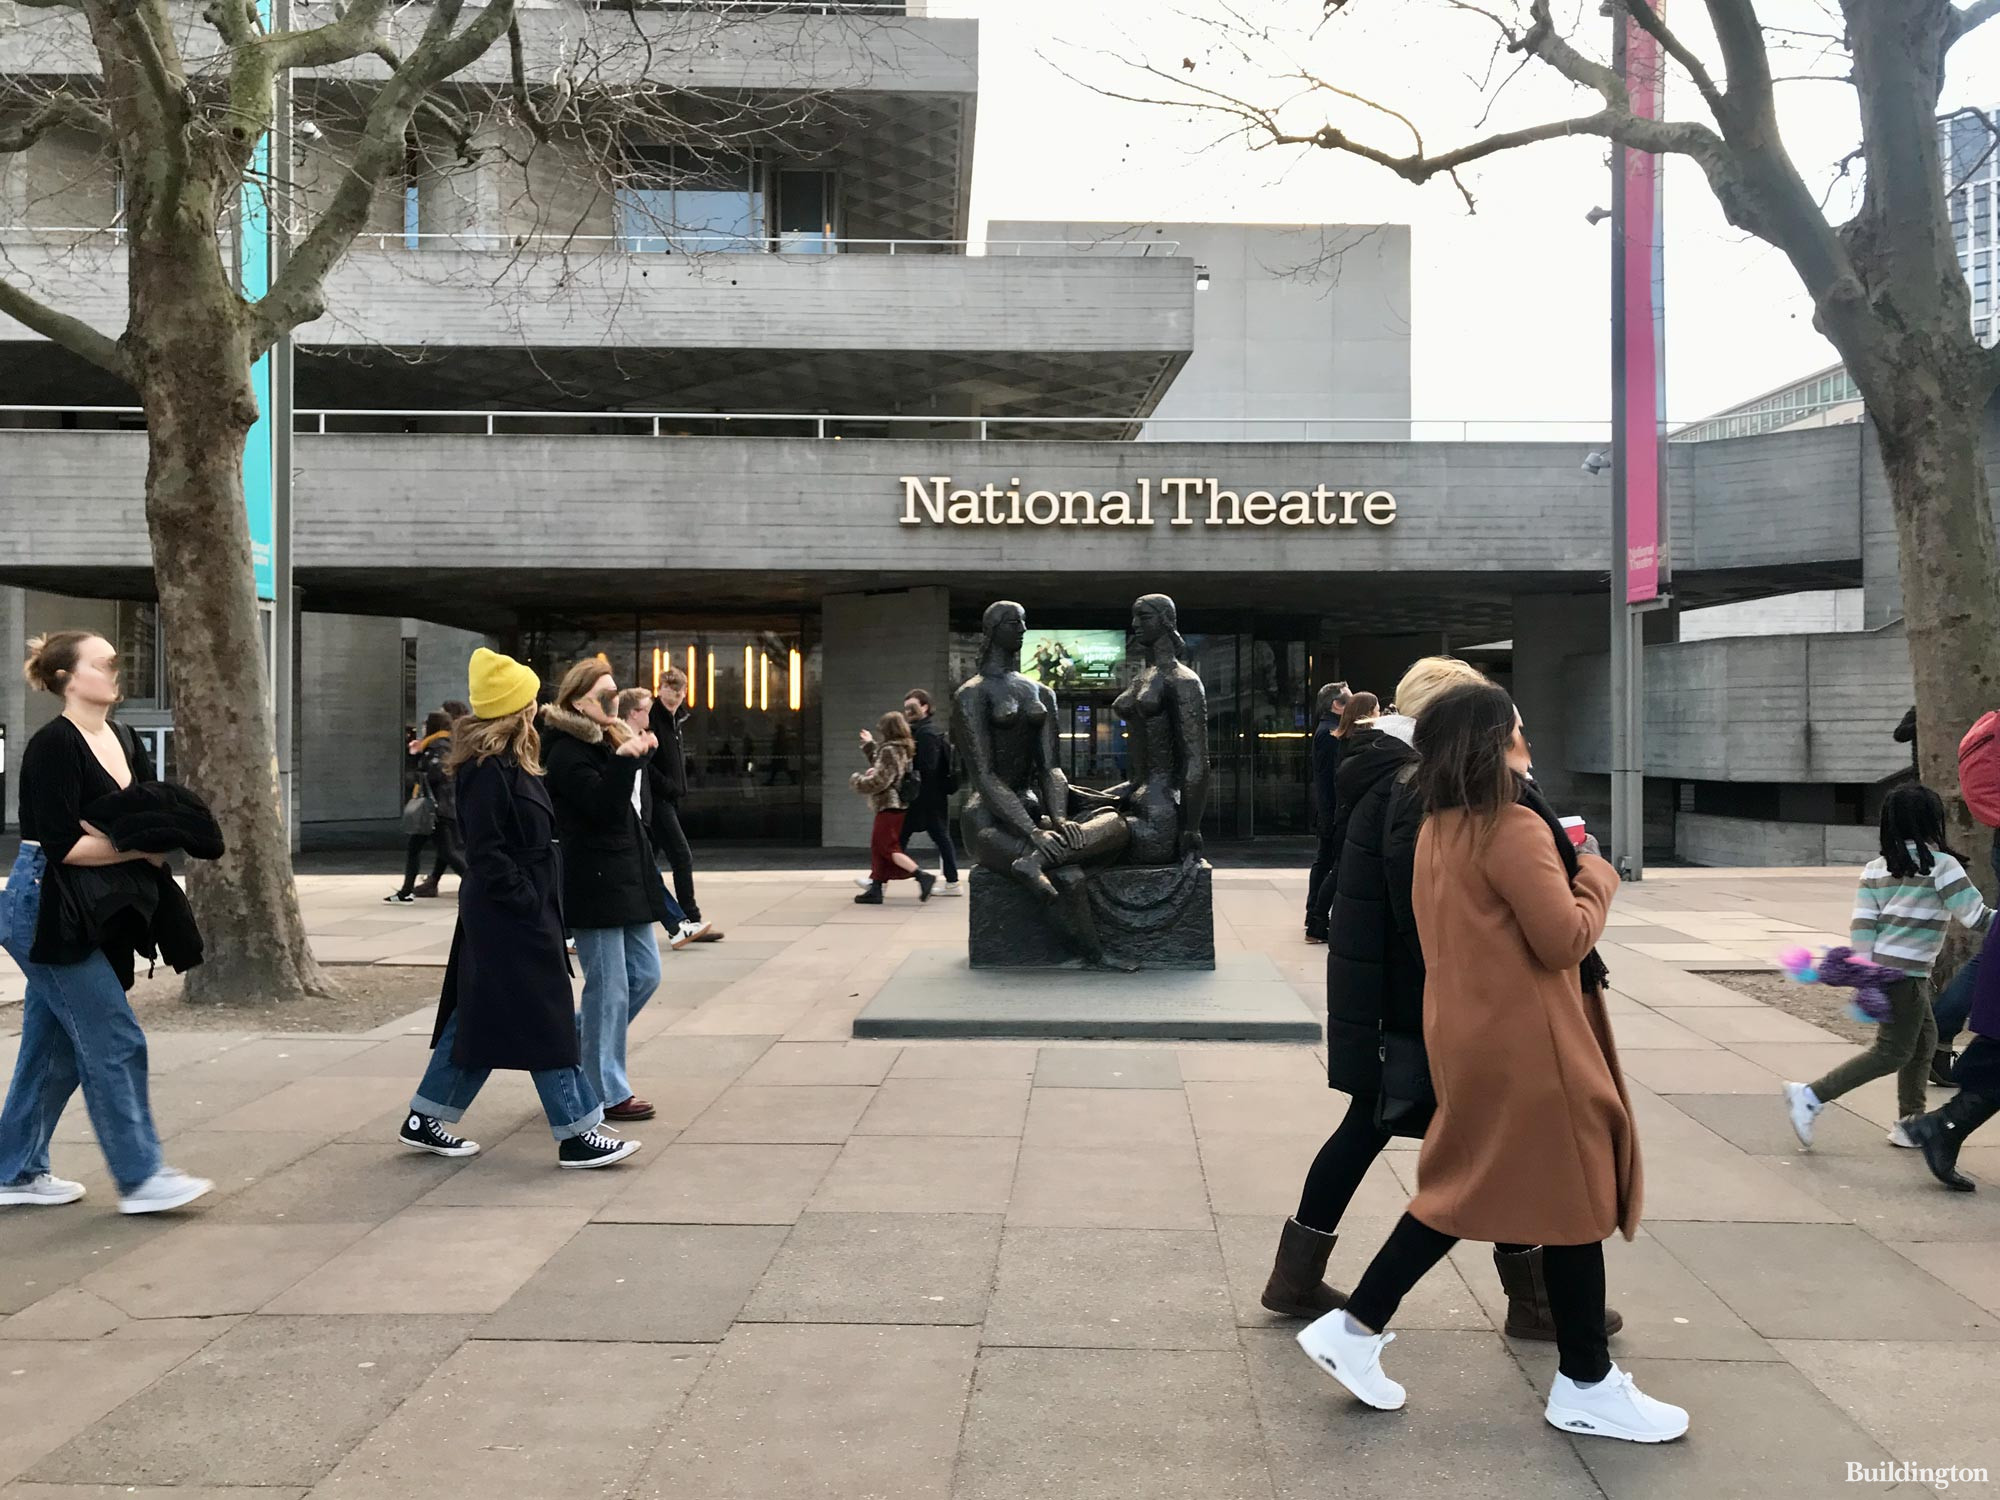 National Theatre building in Southbank